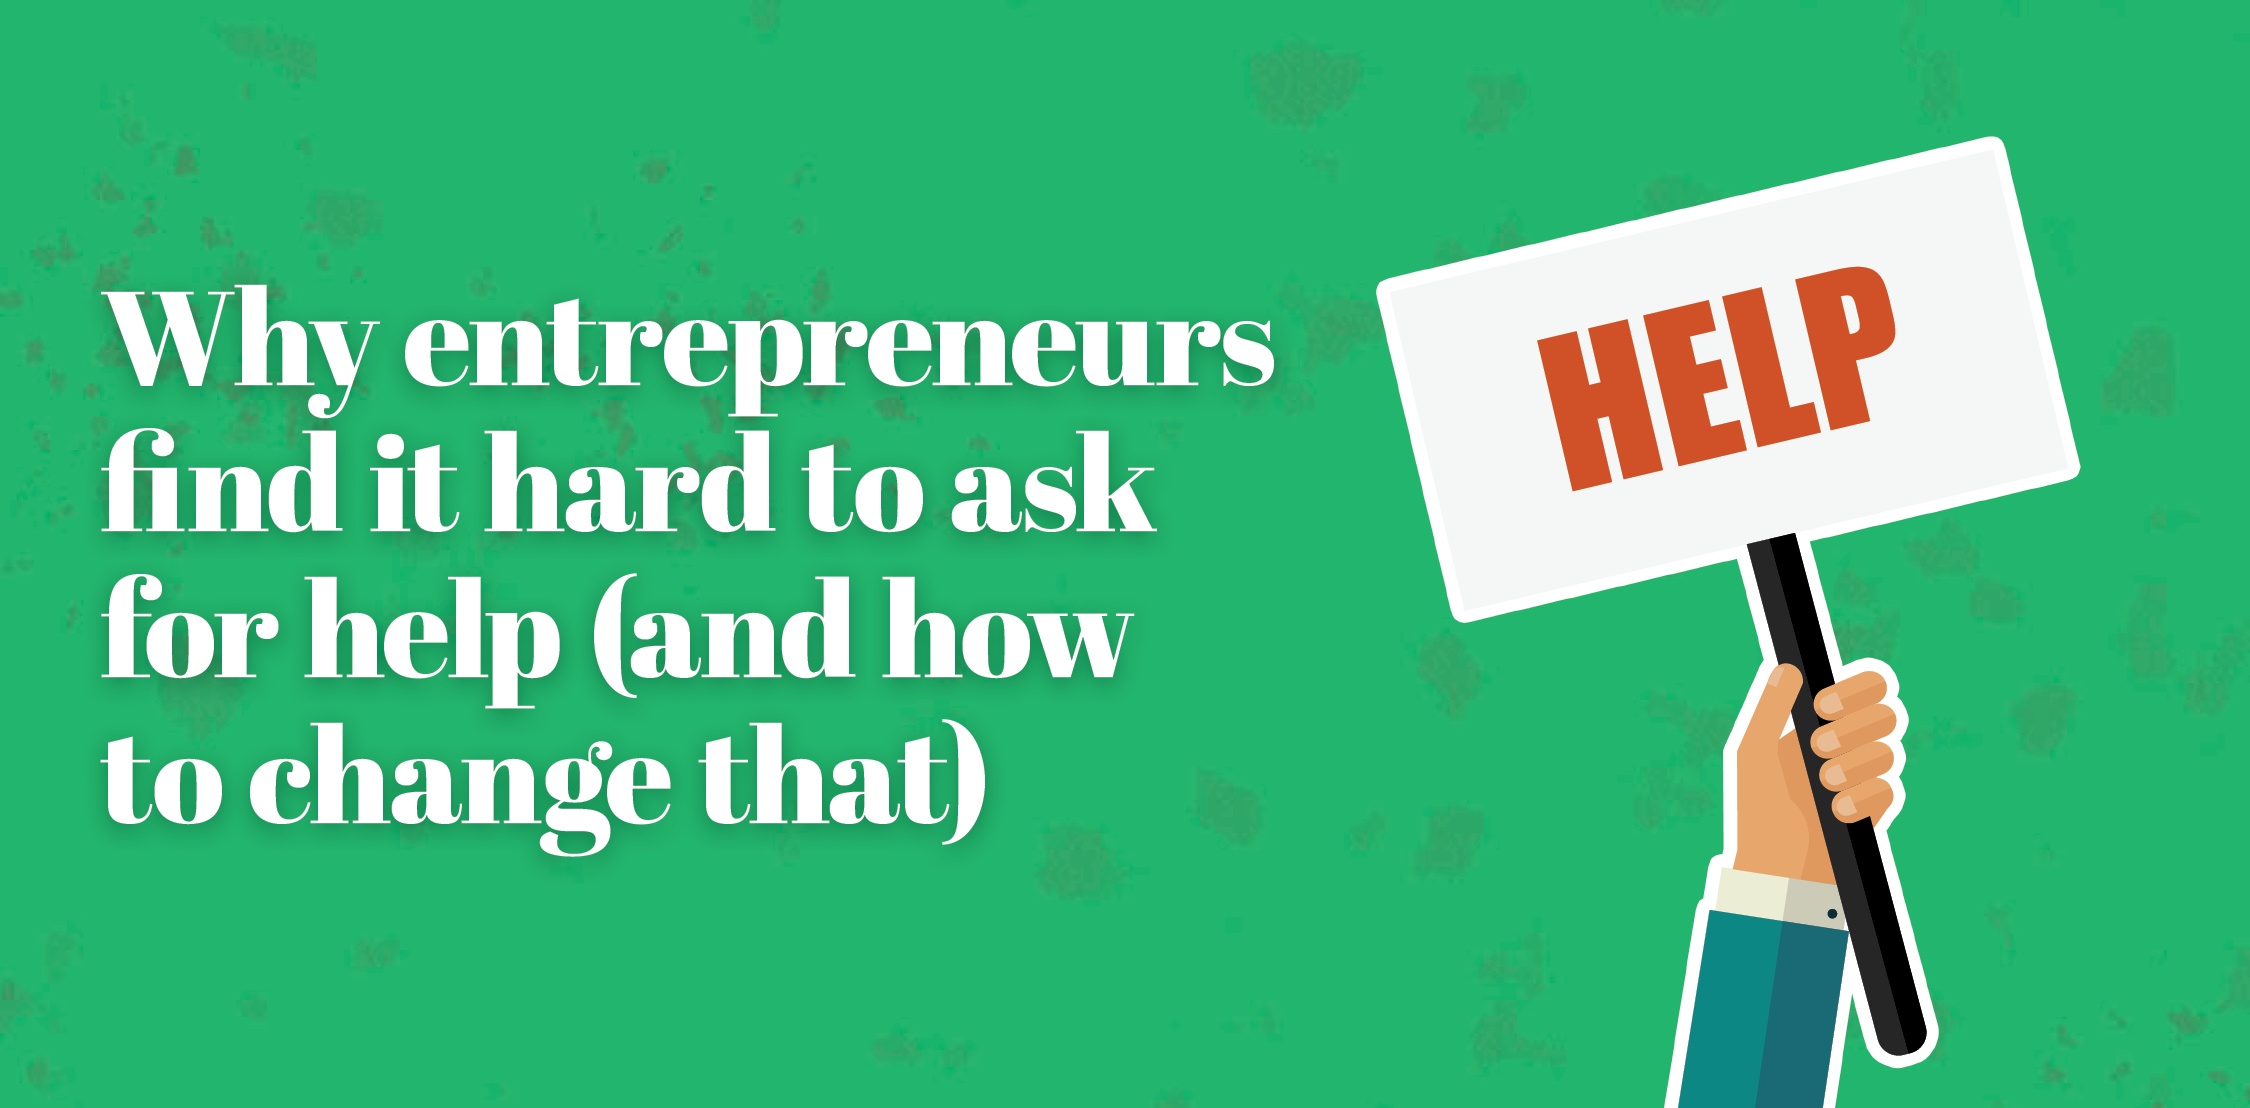 Why entrepreneurs find it hard to ask for help